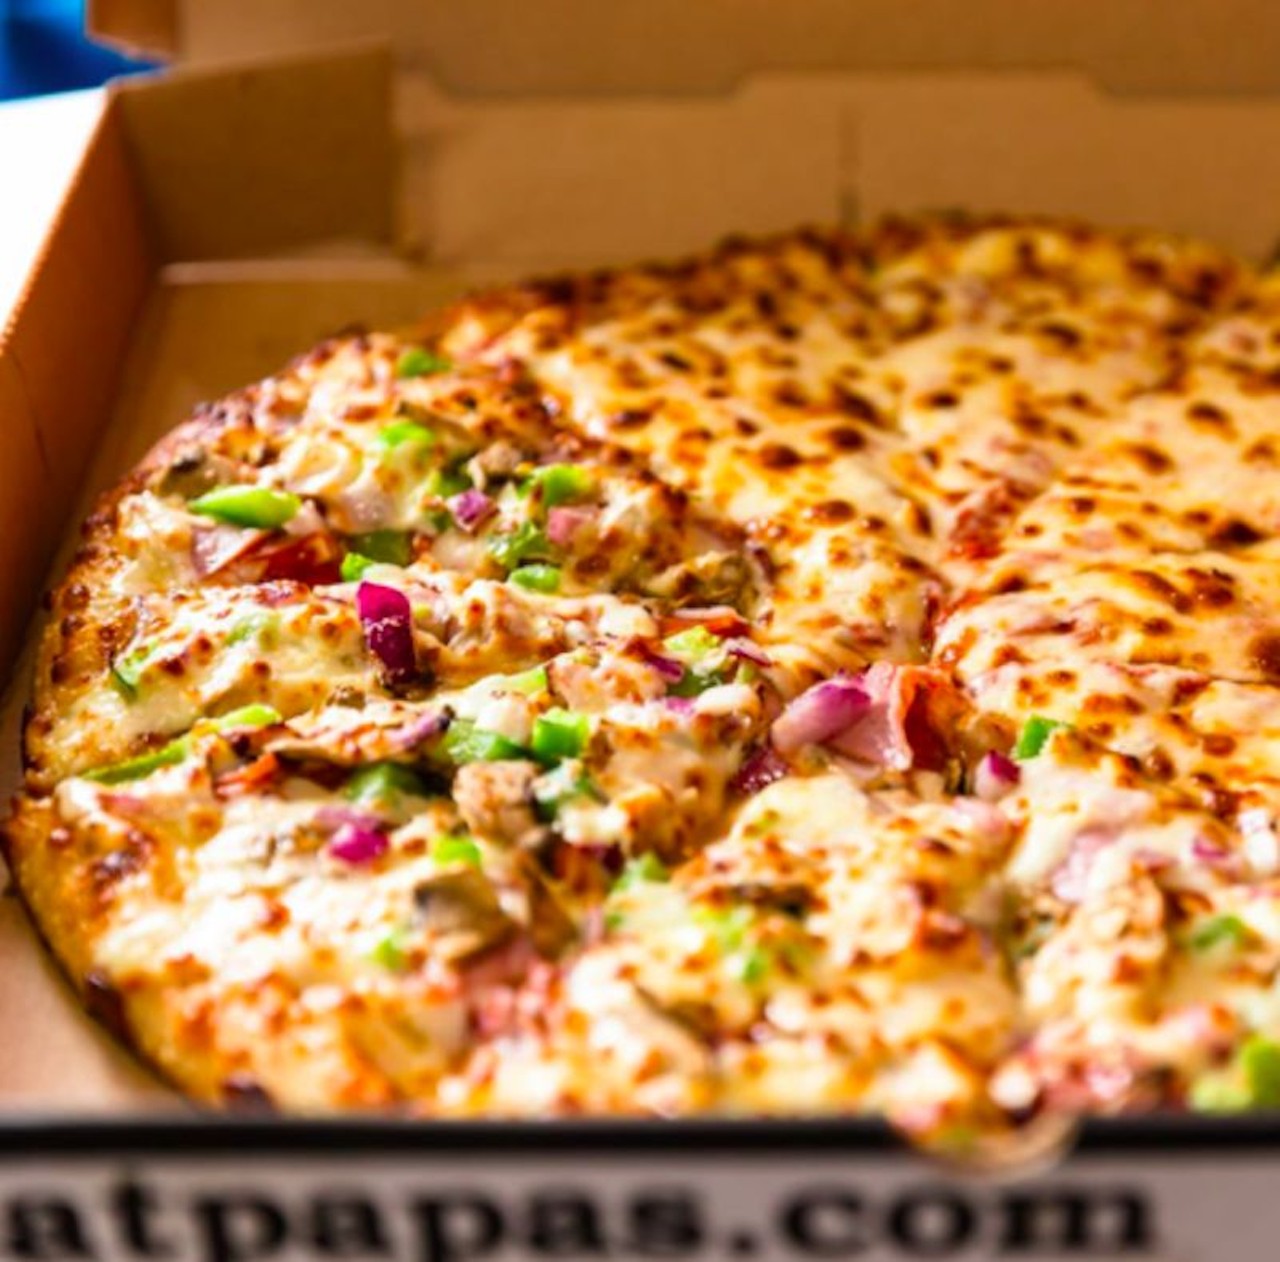 Papa’s Pizza & BBQ
2697 W. Grand Blvd., Detroit; 313-875-5555 | 7410 W. Seven Mile Rd., Detroit; 313-279-2222 | eatpapas.com
At Papa’s you can build your own pizza, or order one of their specialty pizzas such as Meat Lovers, Buffalo Chicken, or the A-1 Philly Steak.
Photo via Papa’s Pizza & BBQ / Facebook